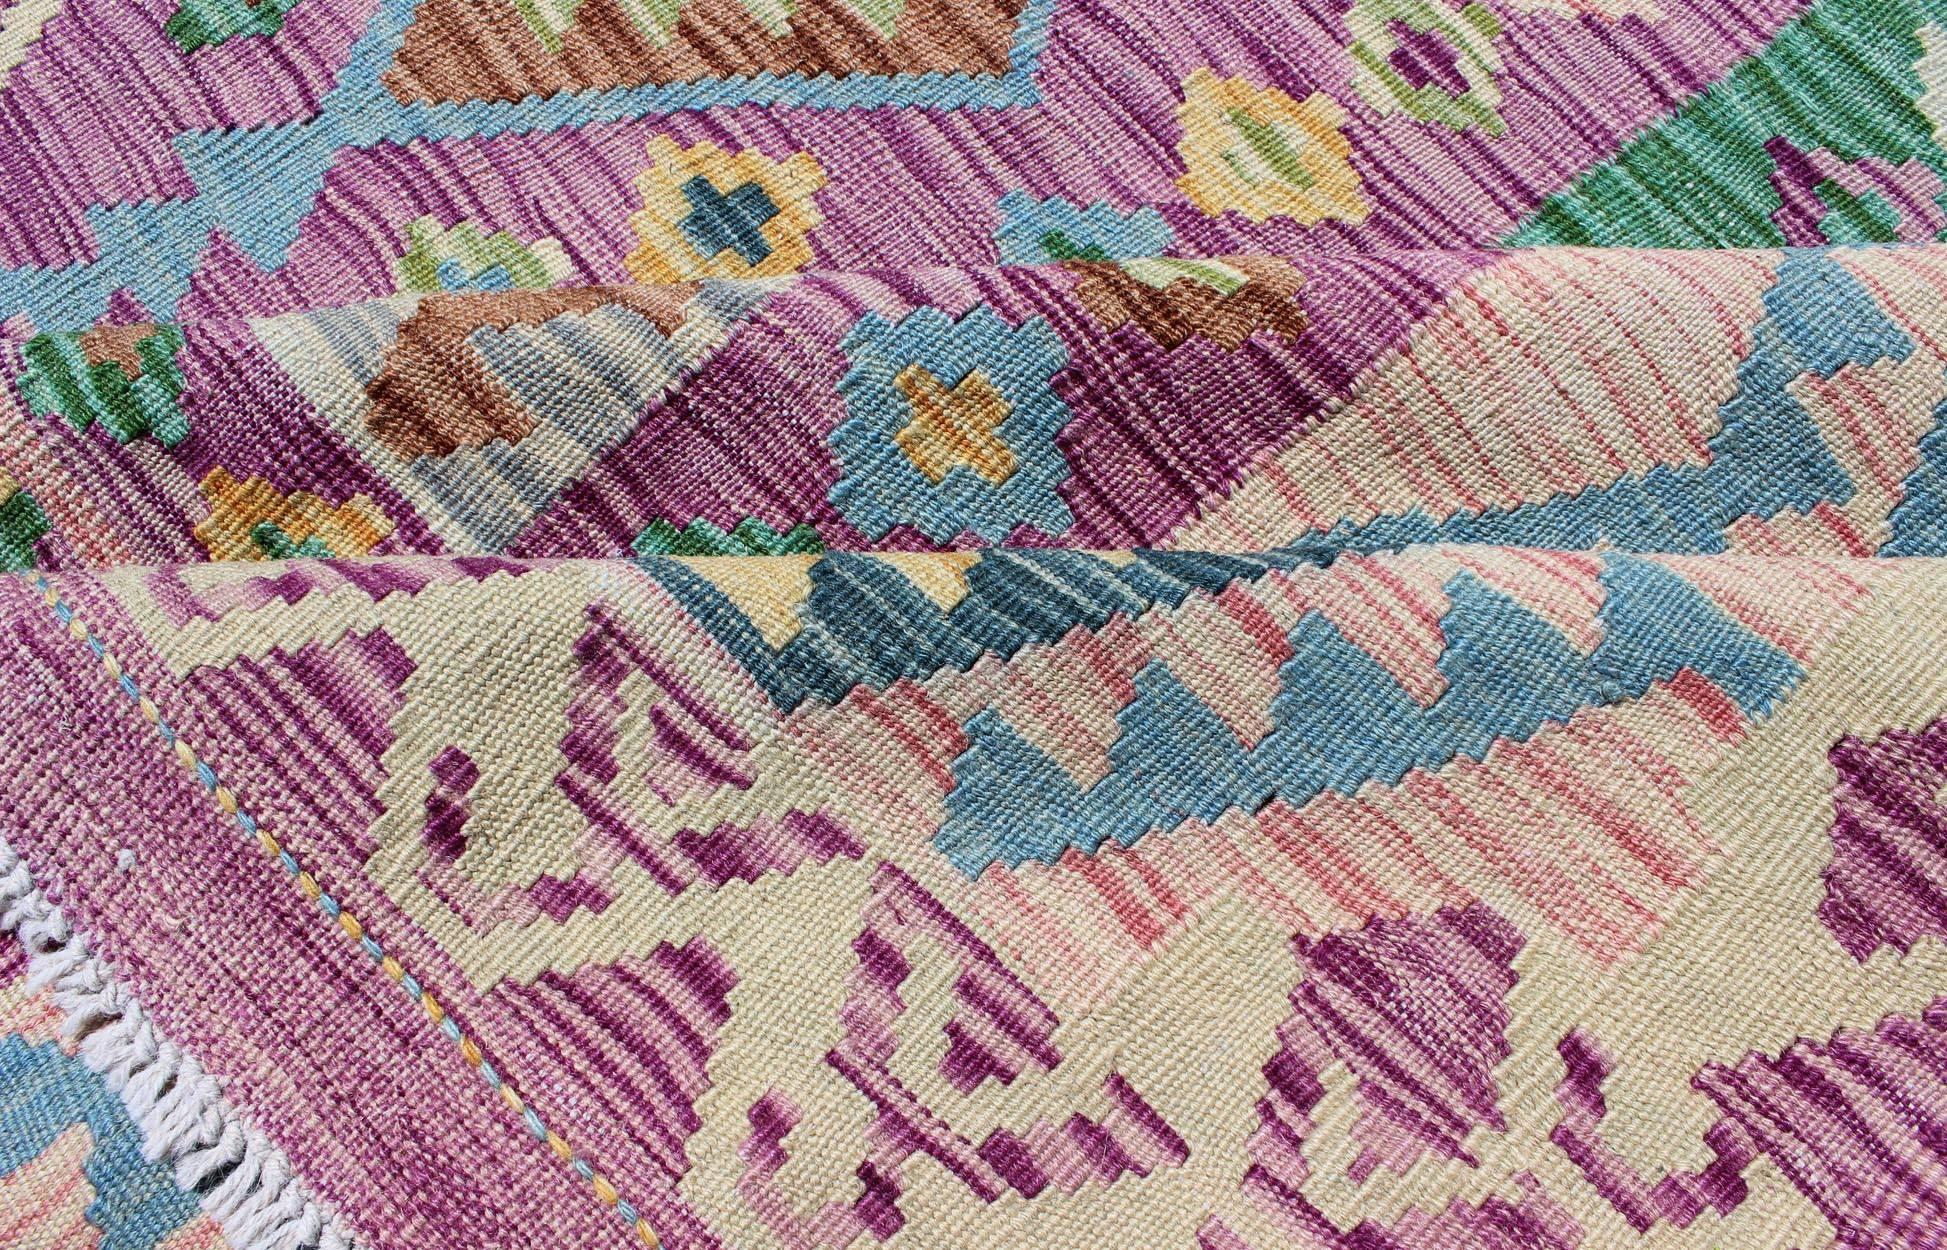 Hand-Woven Modern Afghan Flat Weave Kilim Rug in Purple, Lavender, Green, yellow and Cream 